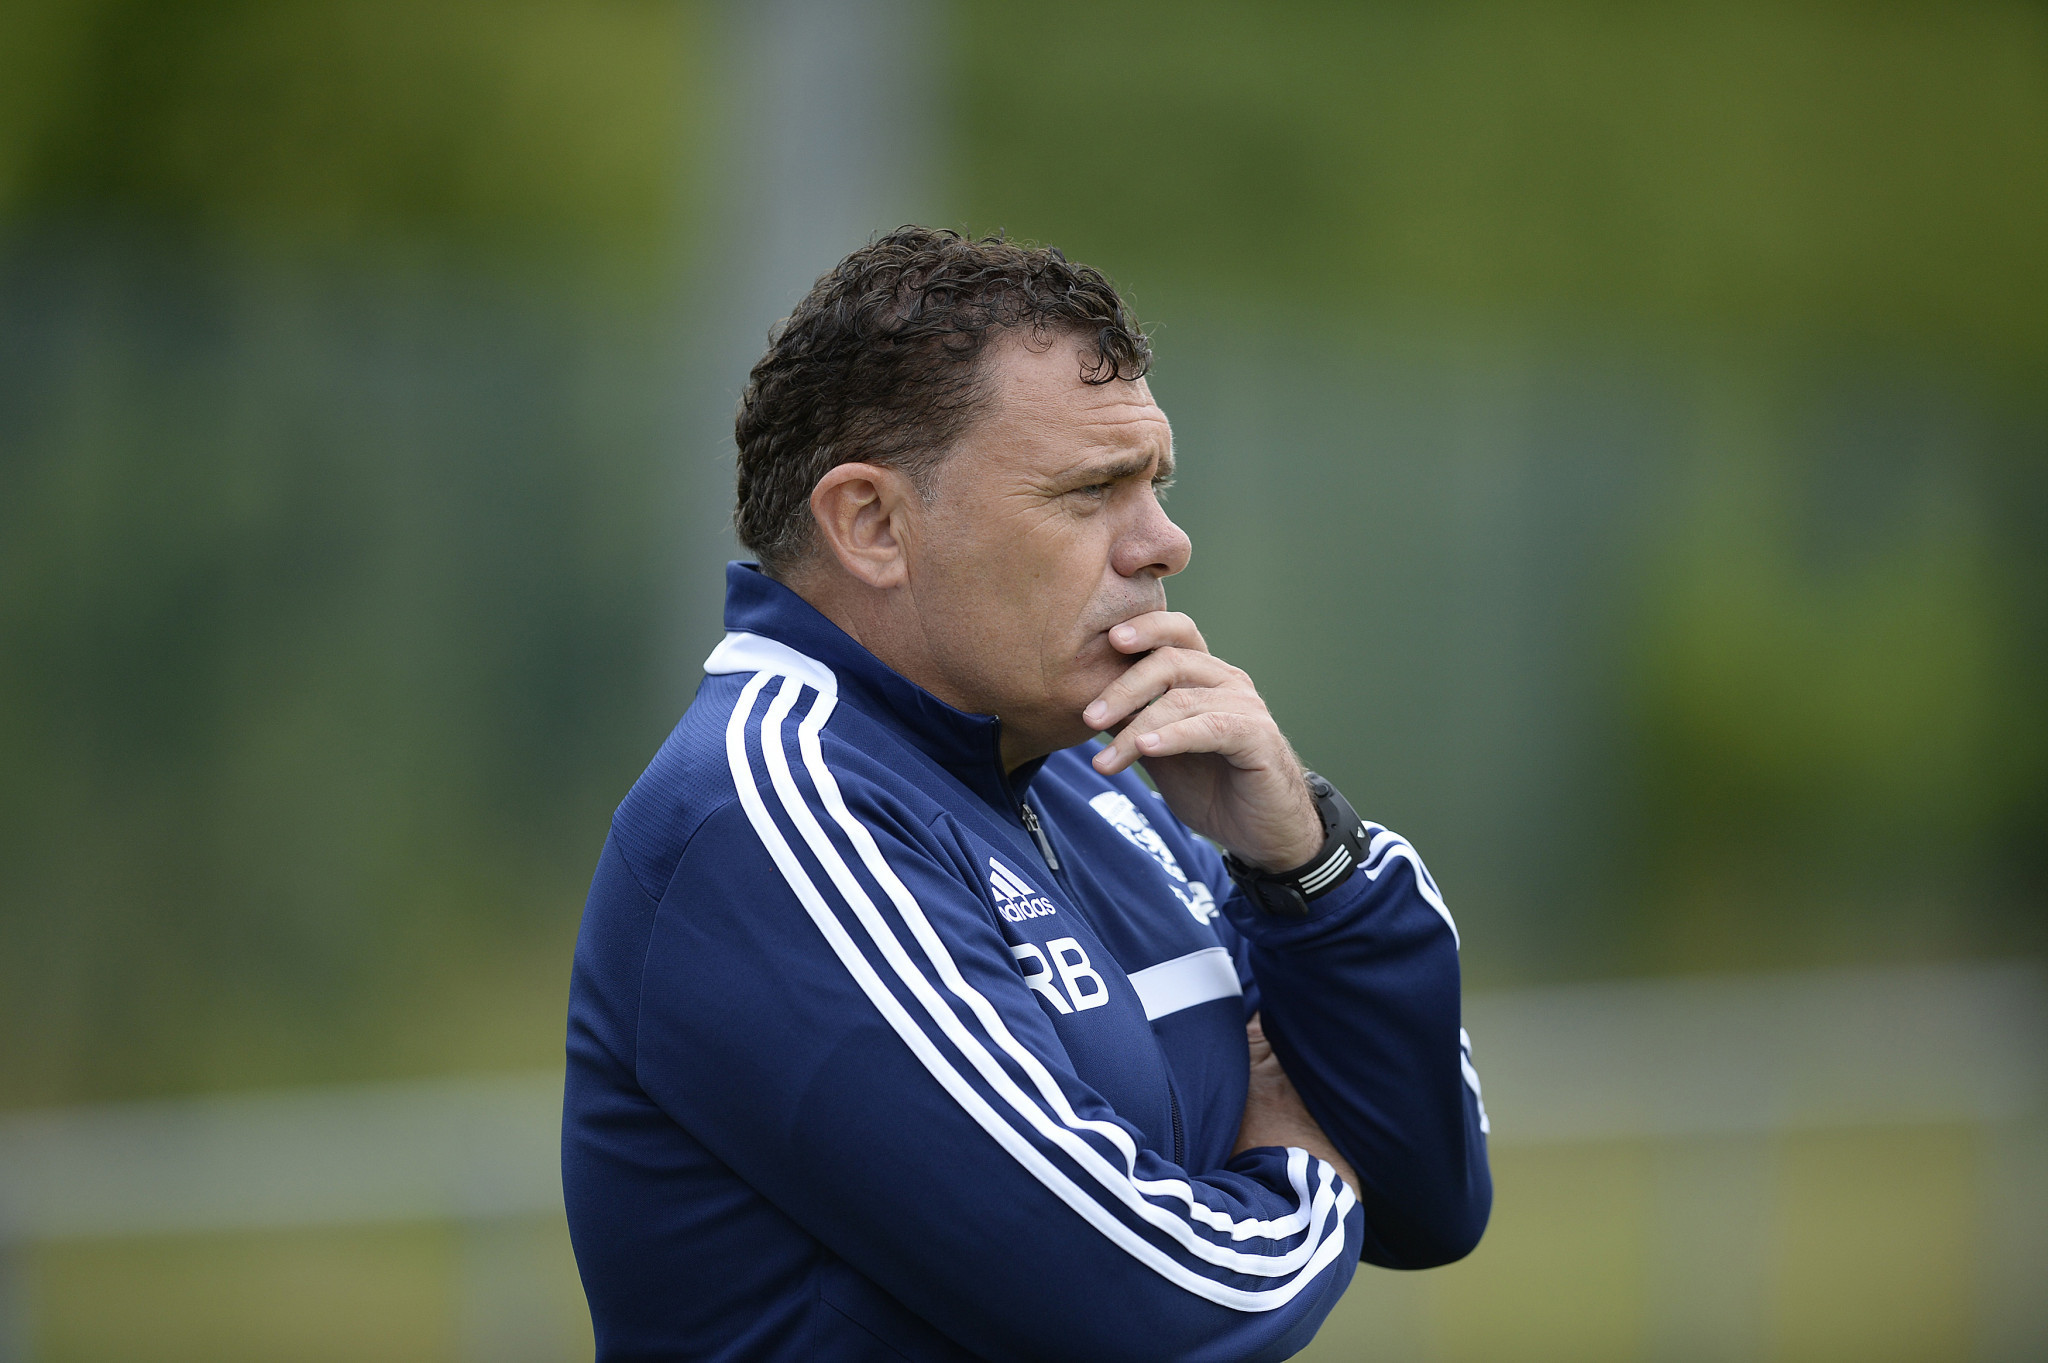 Ritchie Burke was accused of racially-insensitive remarks while coaching at Washington Spirit ©Getty Images